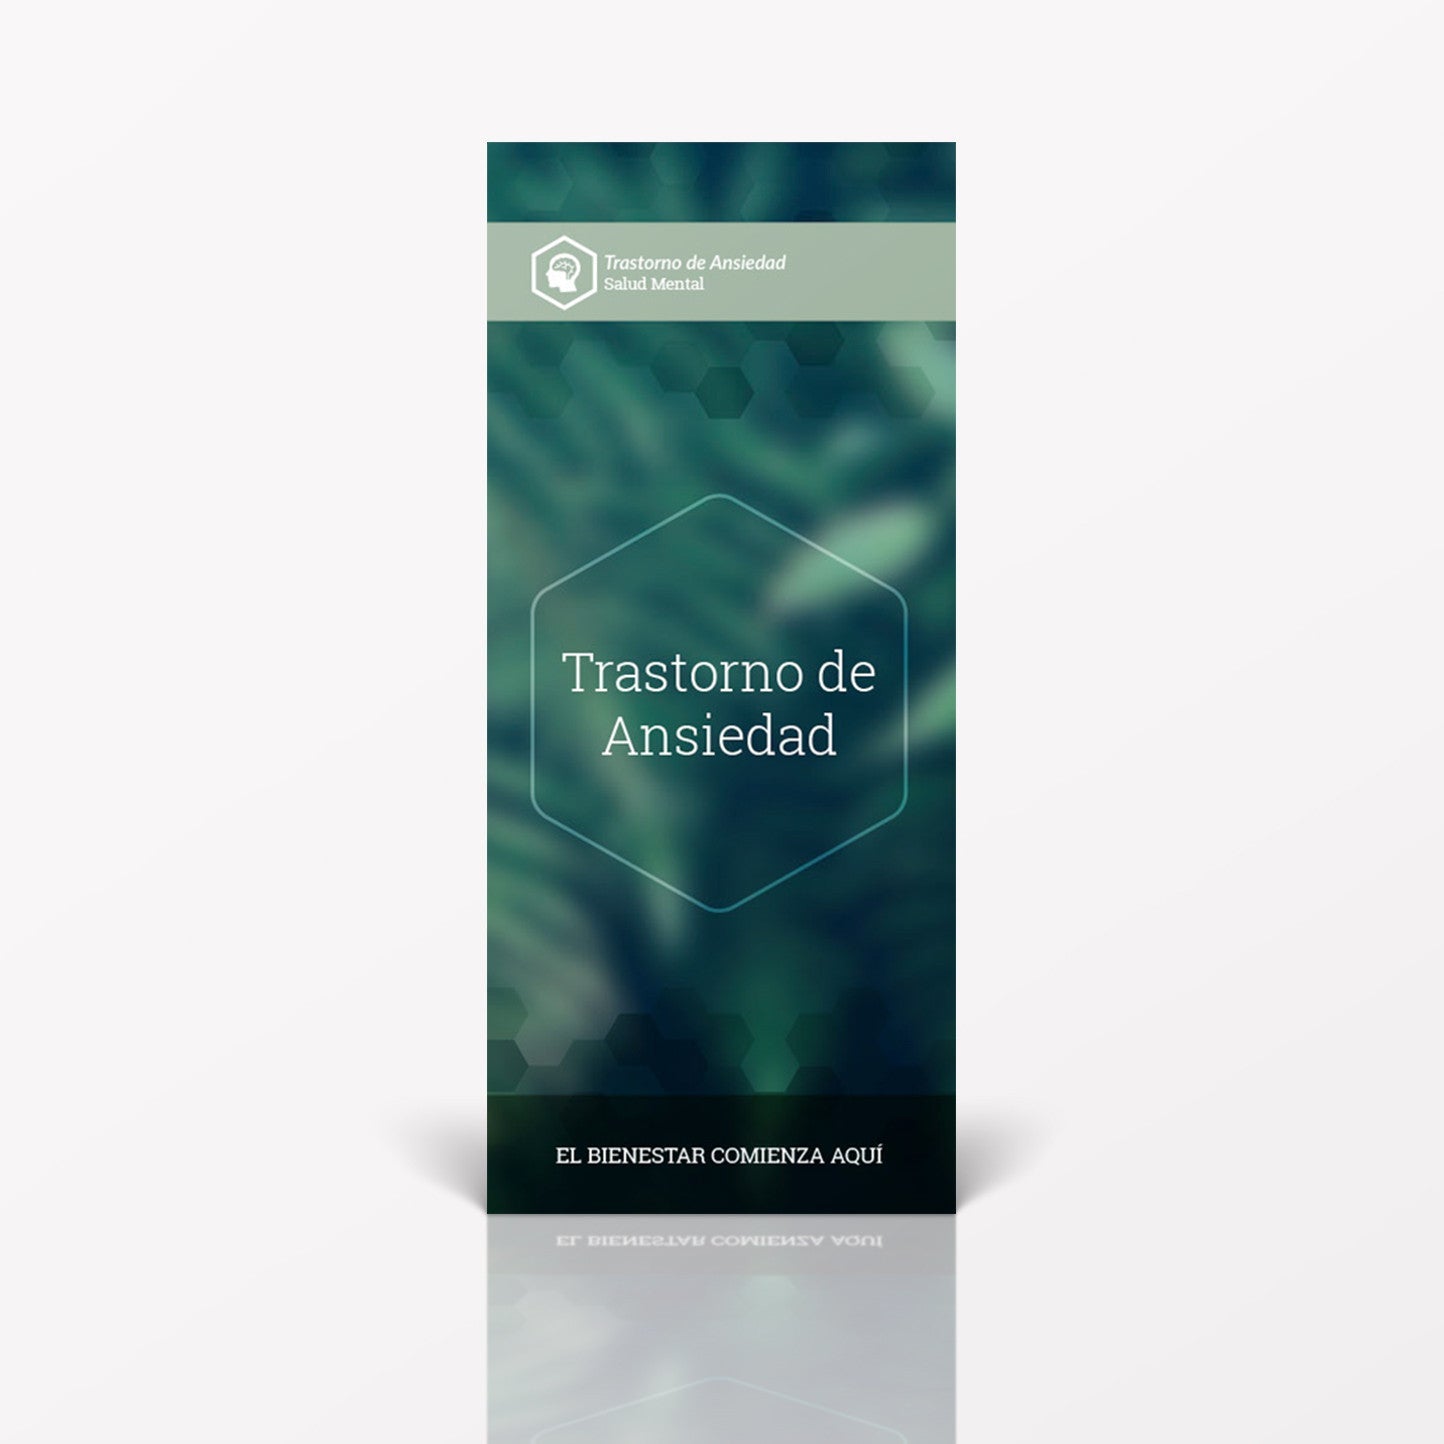 Spanish pamphlet on Anxiety Disorders